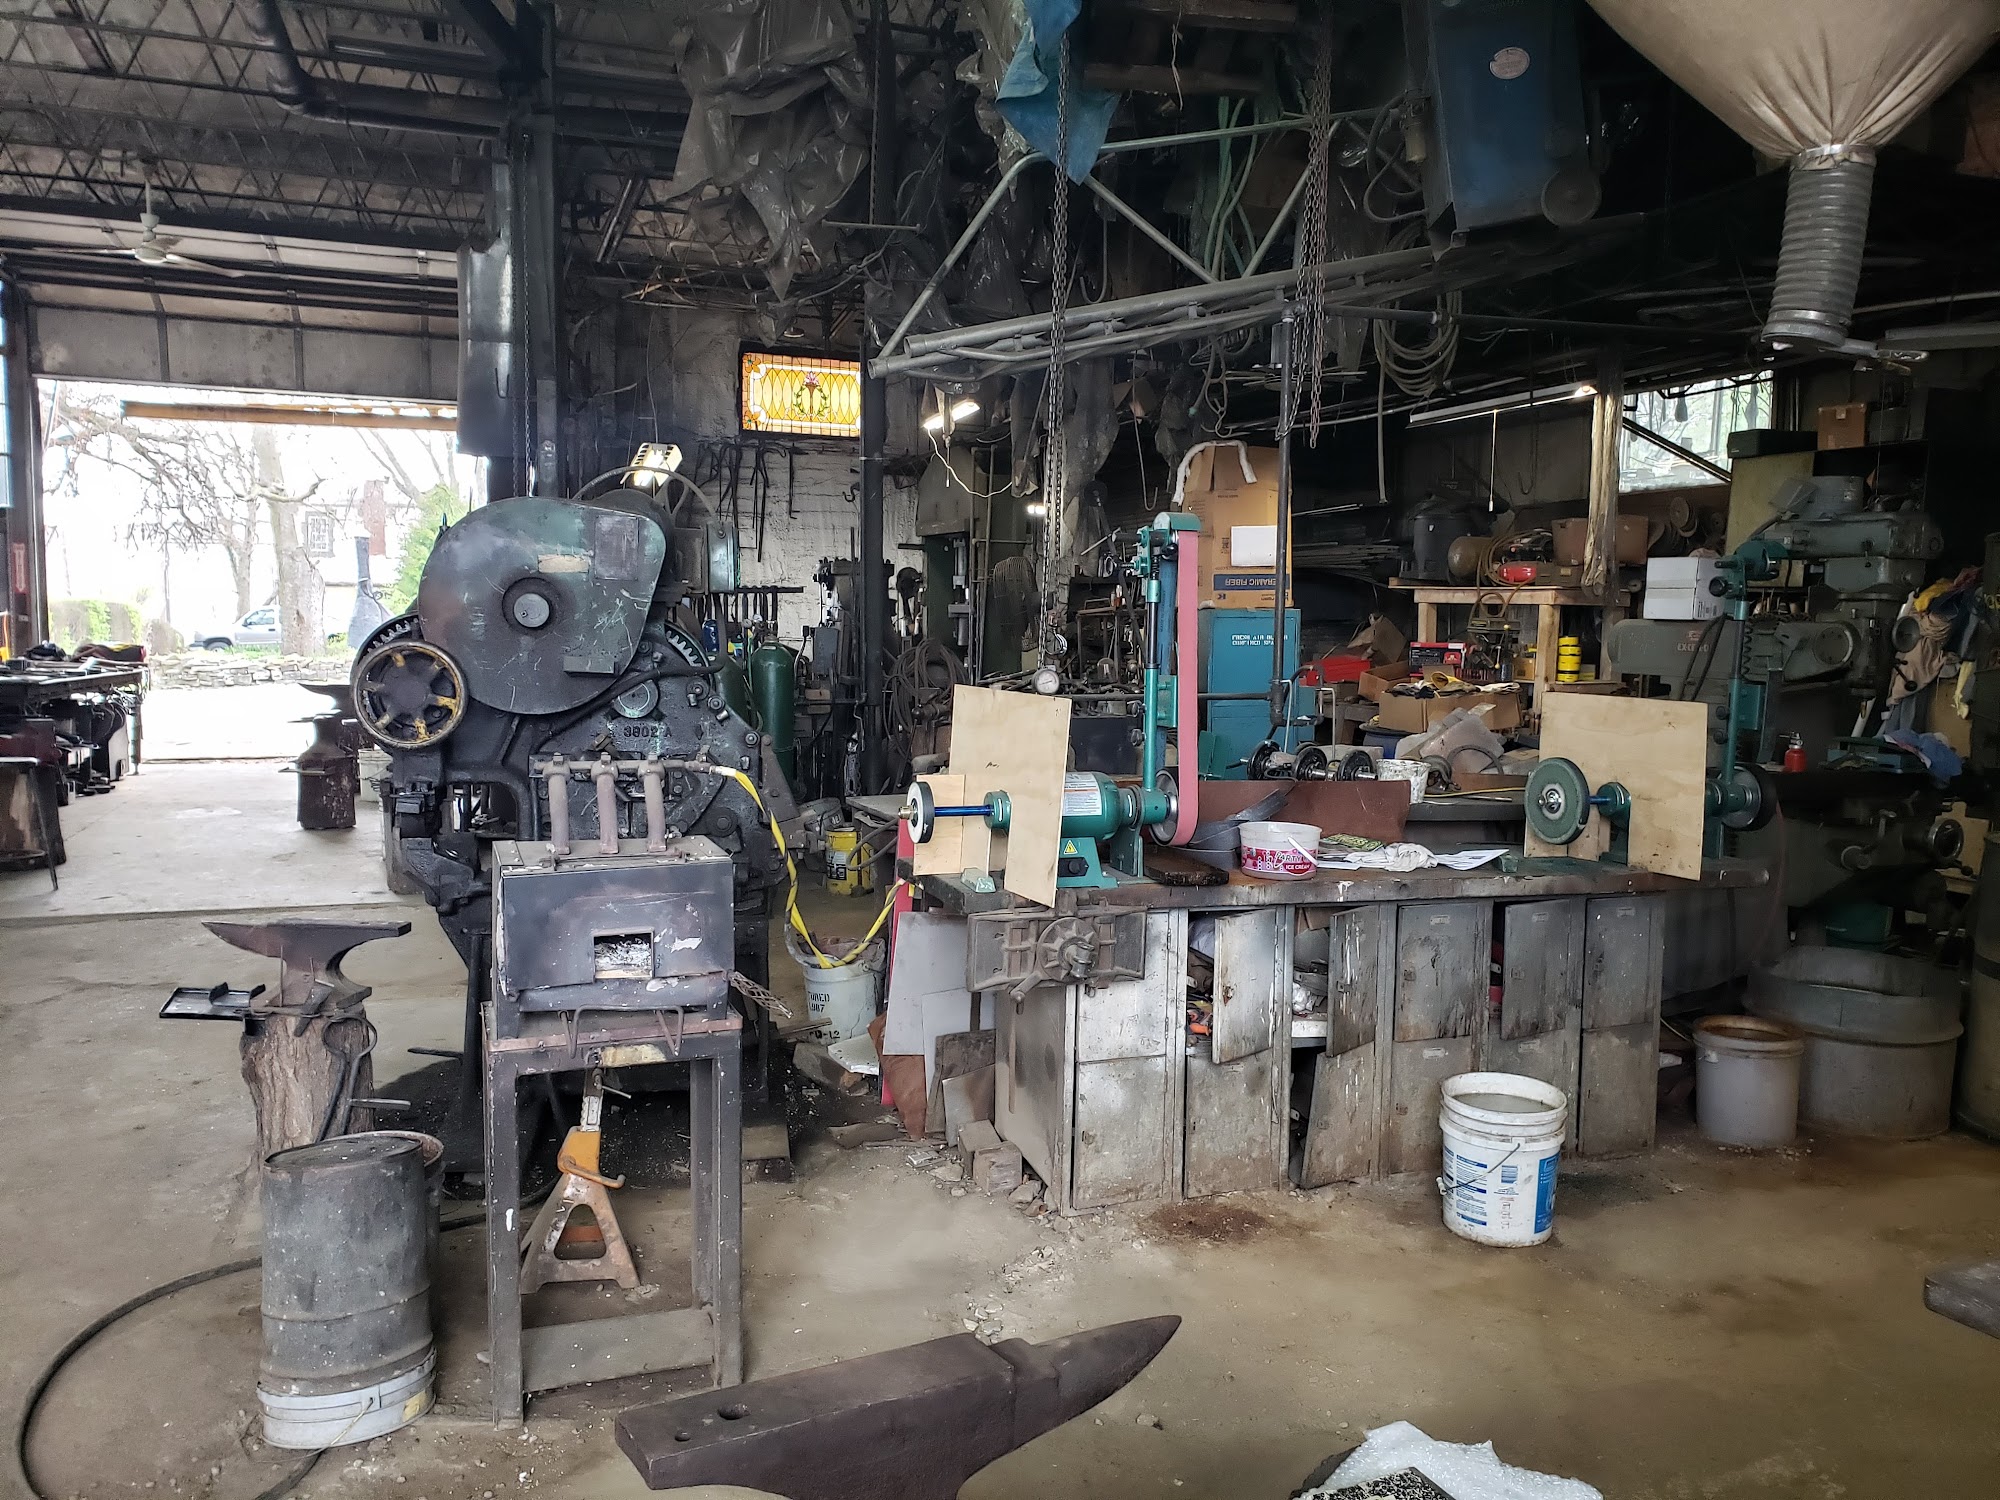 Kaviar Forge & Gallery